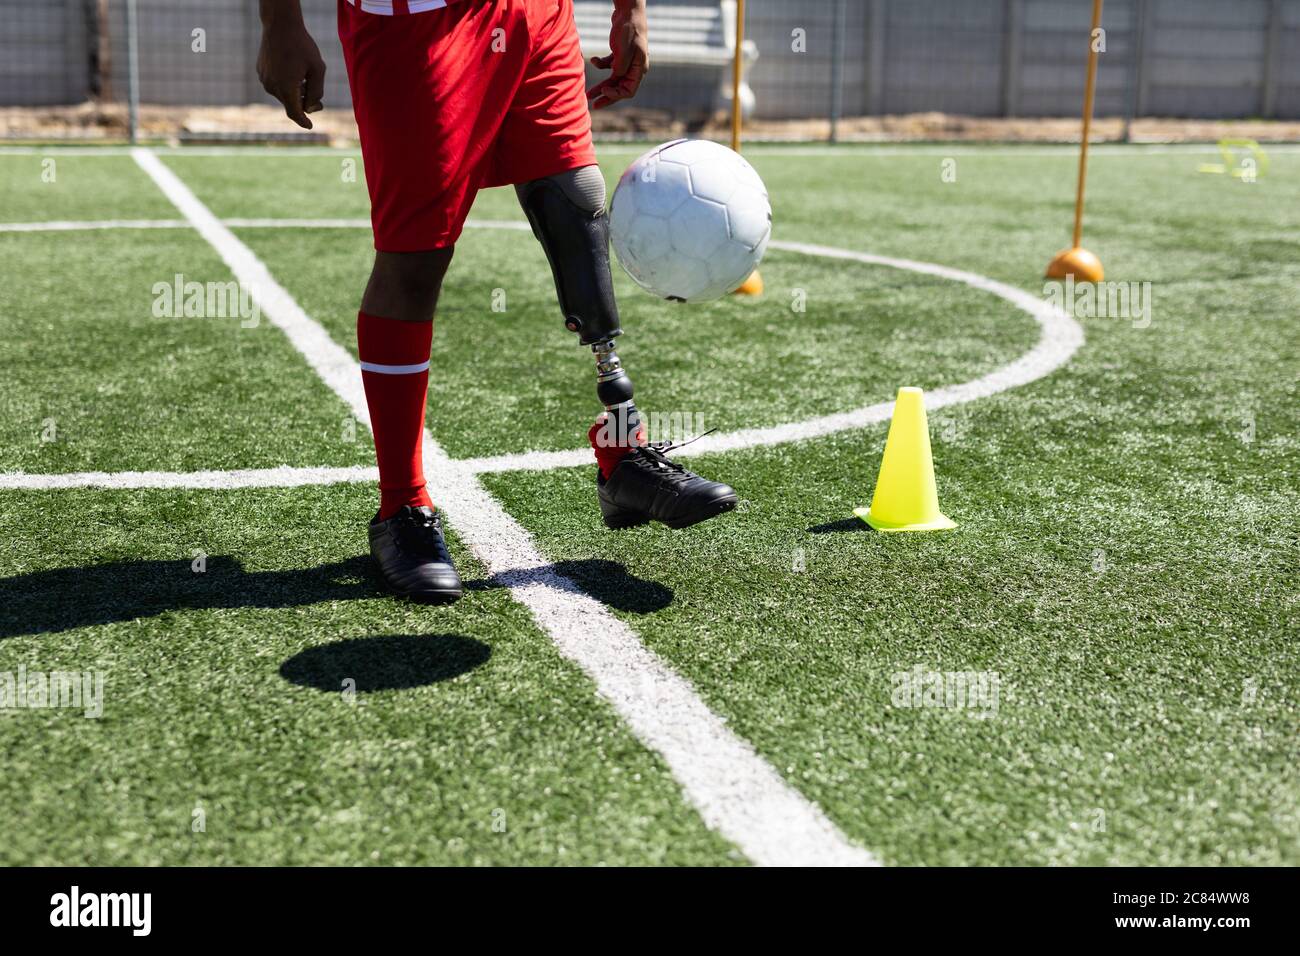 Mixed race male football player with prosthetic leg wearing a team strip training at a sports field in the sun, warming up kicking ball. Stock Photo